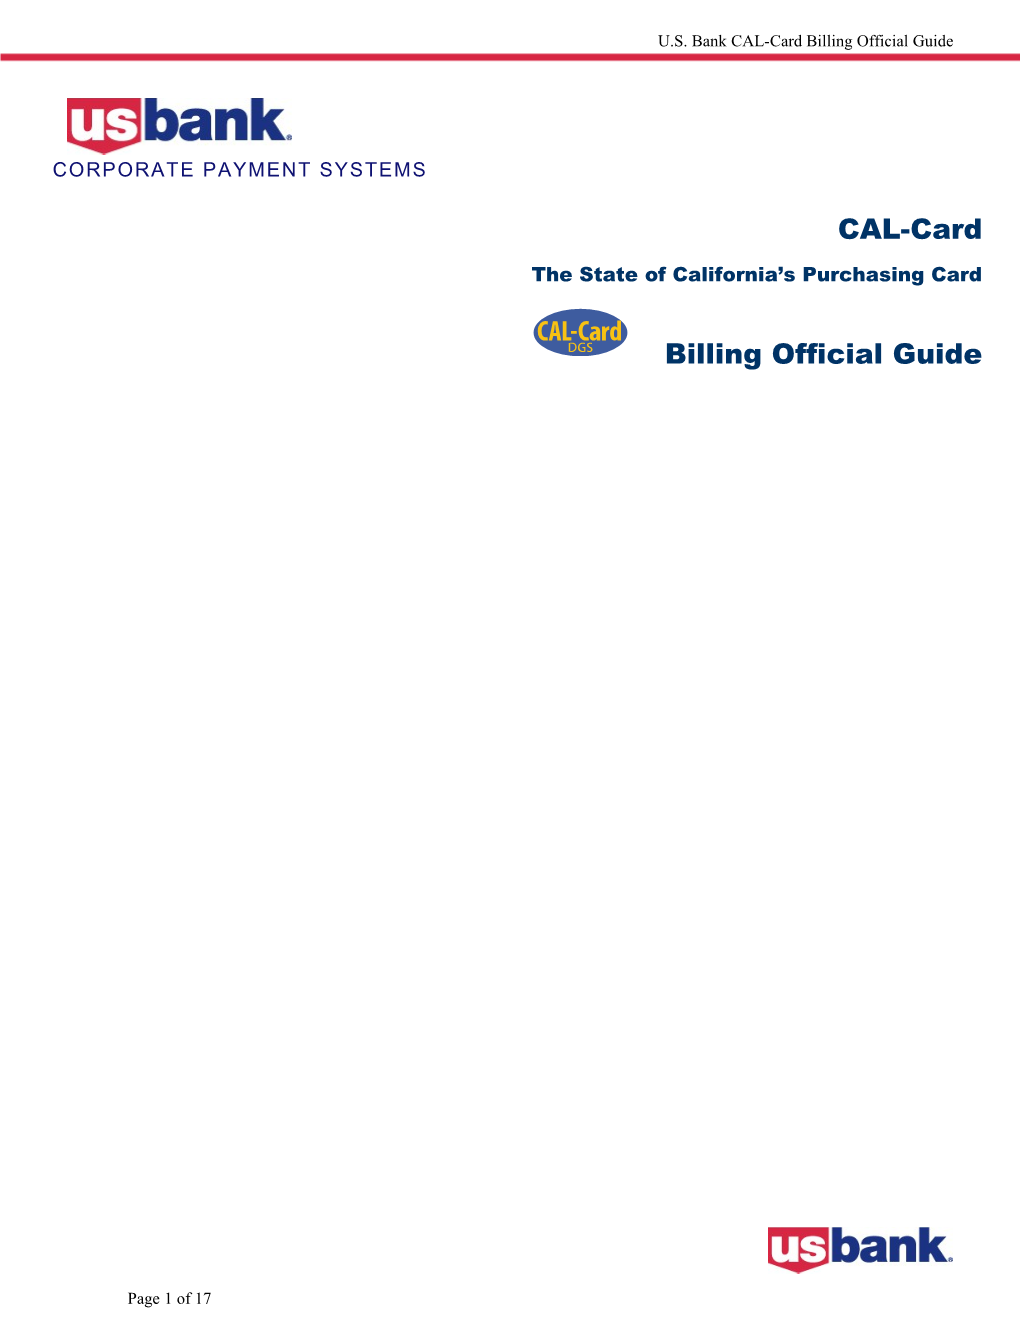 Billing Office/Approving Official Guide